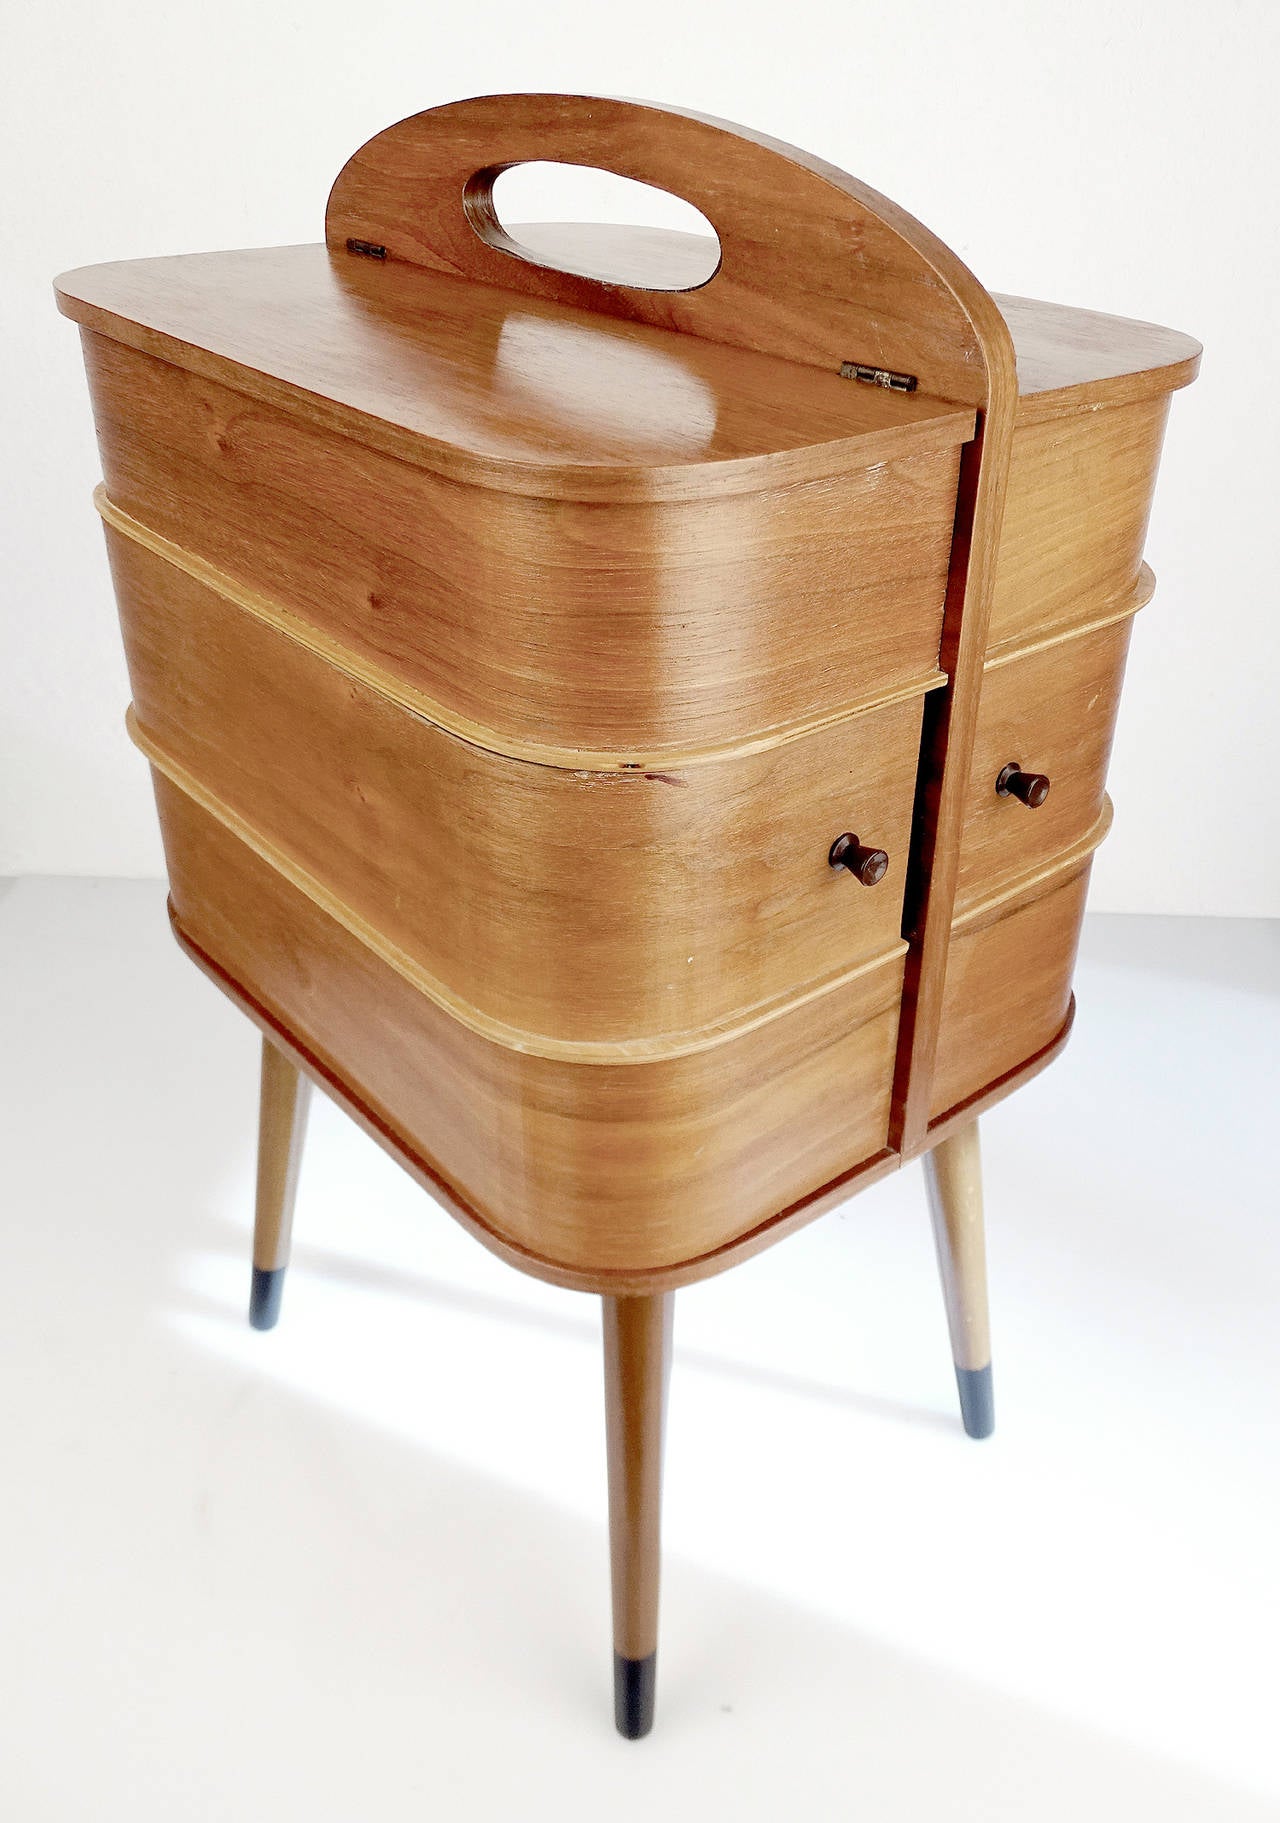 Scandinavian Modern Danish Portable Sewing Box Vanity Side Table with Revolving Drawers